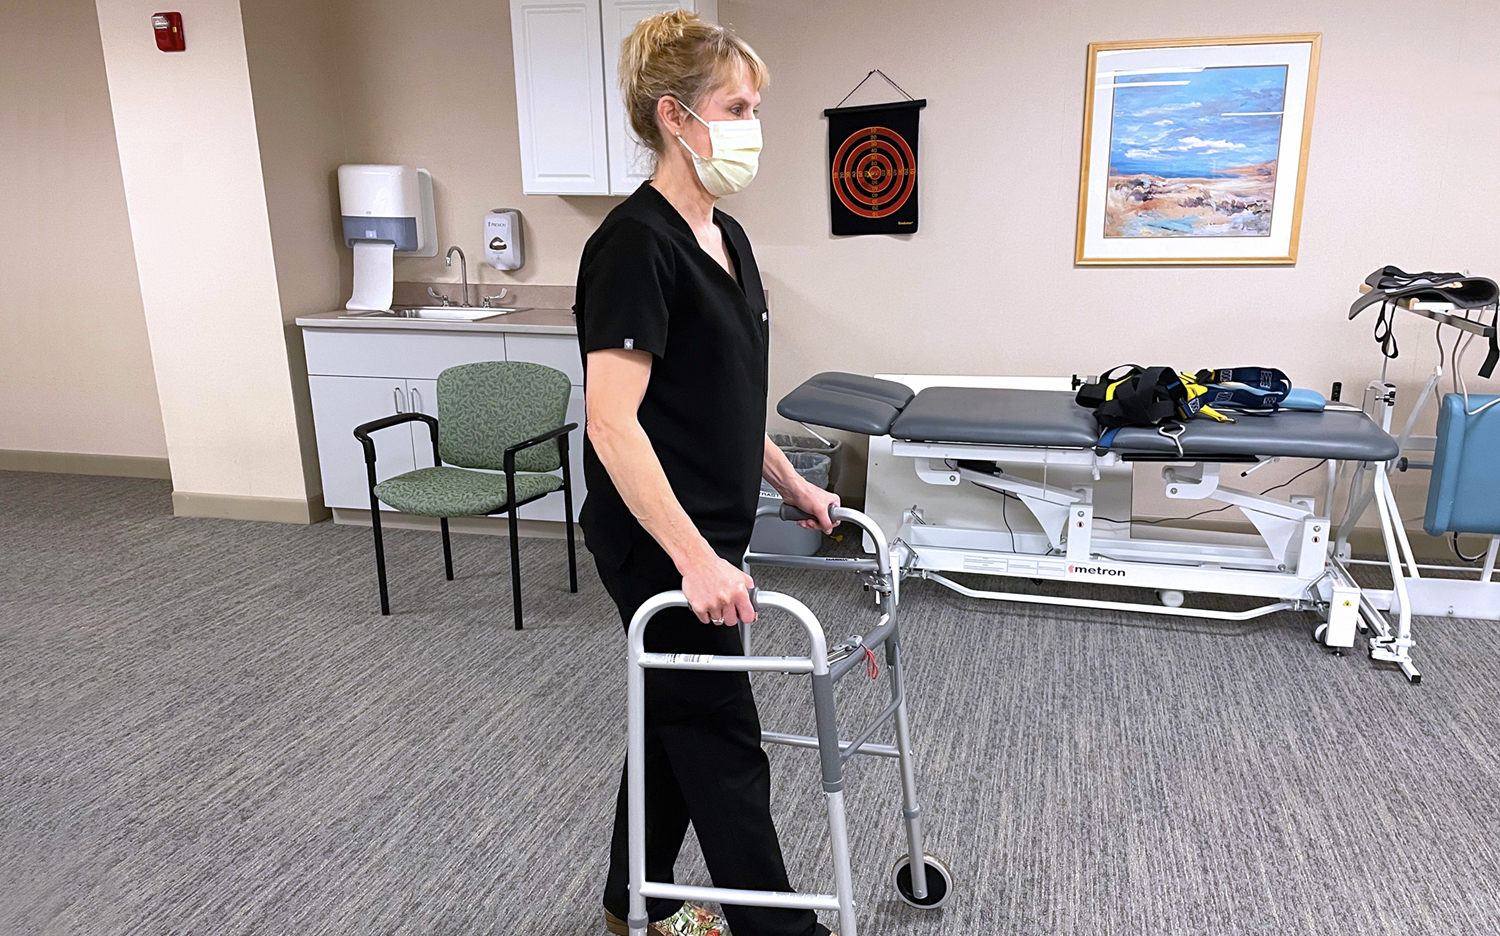 Barbara Kruschwitz, PT, DPT at Whittier Rehabilitation Hospital Bradford with a Physical Therapist’s advice on “Is a wheeled walker best for me?”